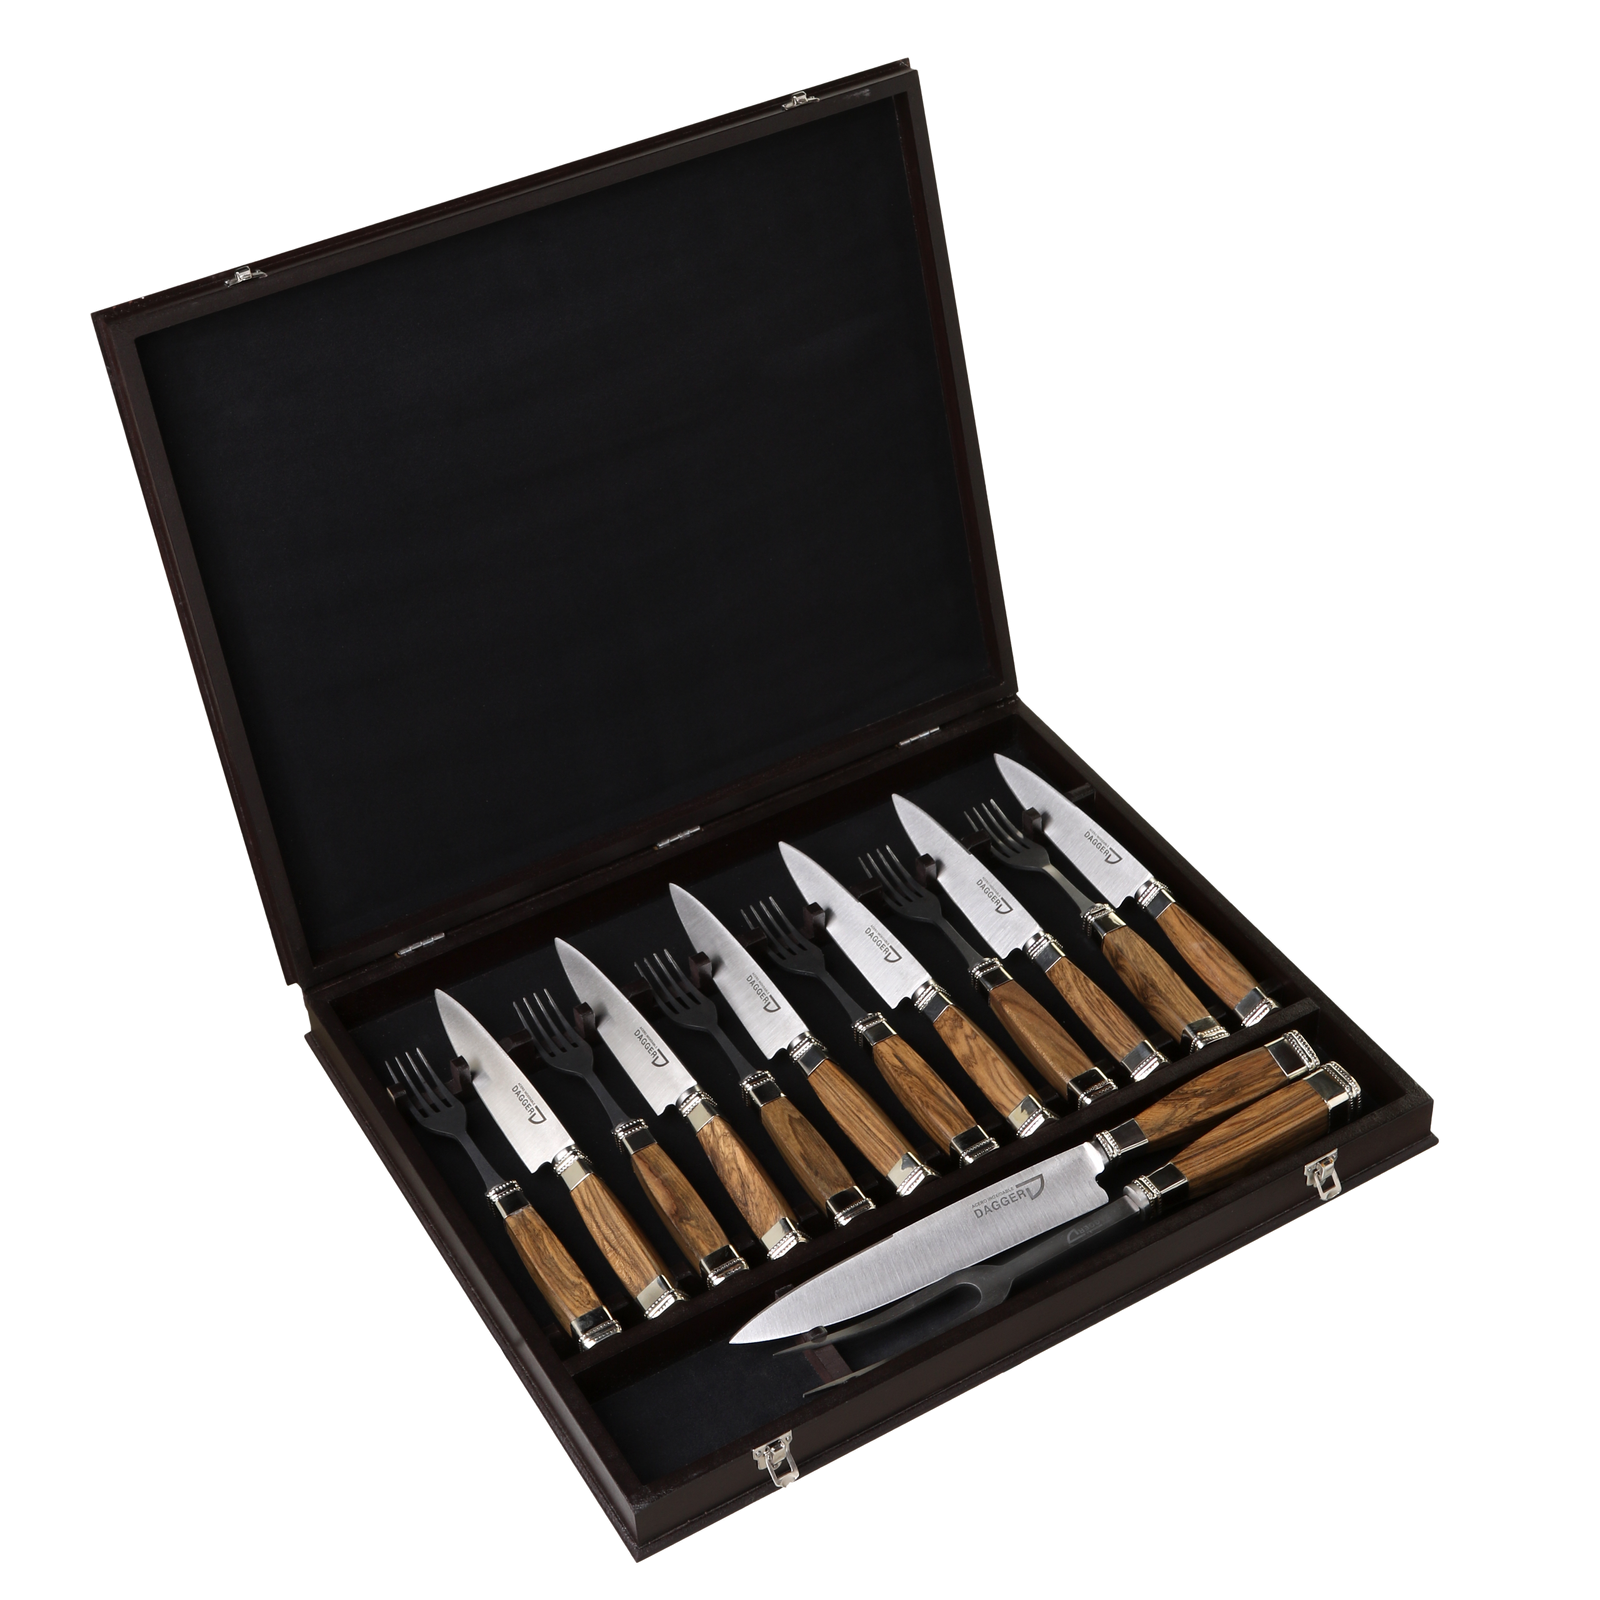 Cutlery Set of 6 Fork and Knife + Carving Set Squared Wood and Nickel Silver Handles